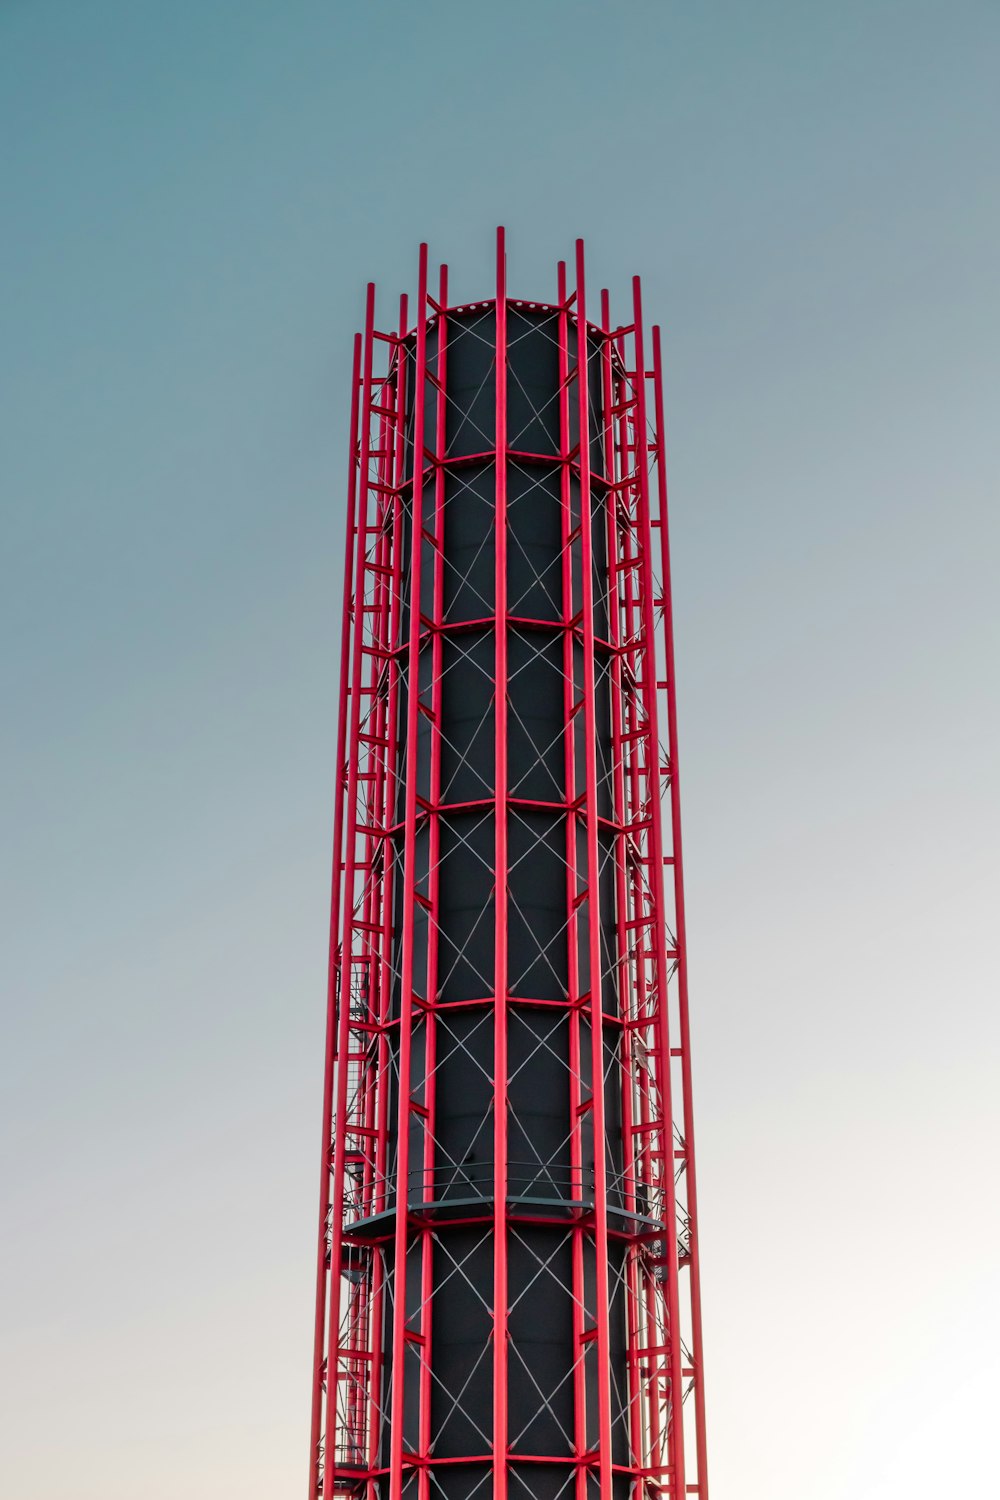 red tower under gray sky